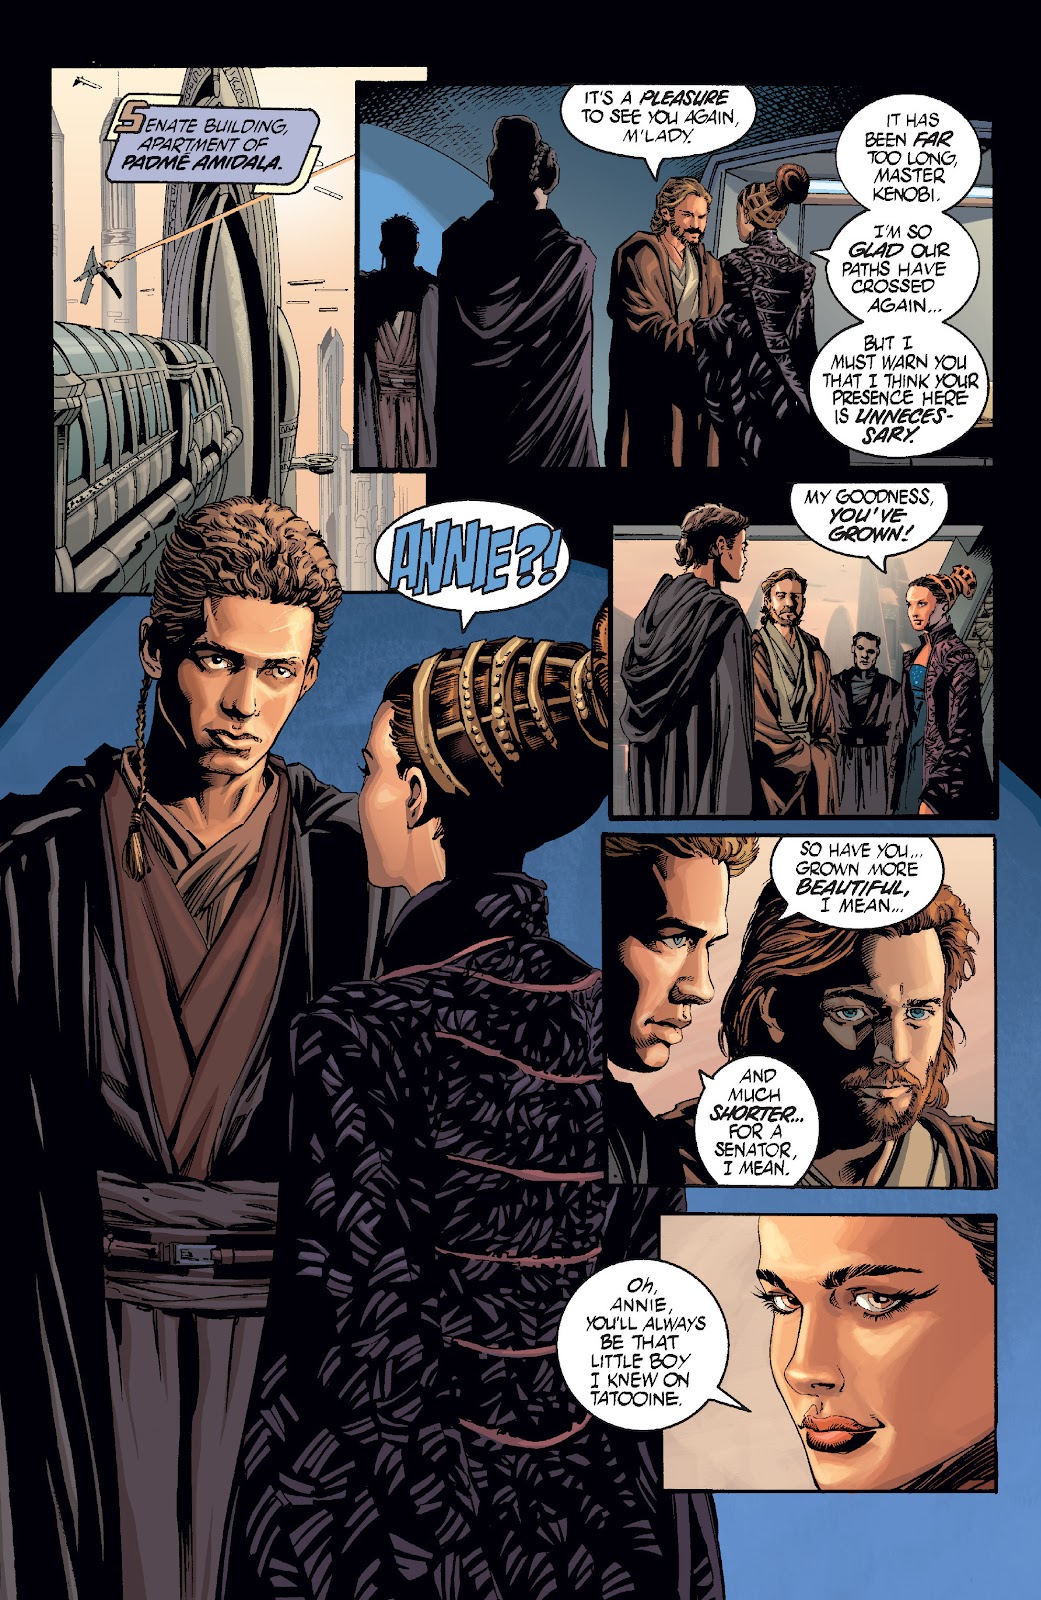 Star Wars: Episode II - Attack of the Clones issue 1 - Page 9